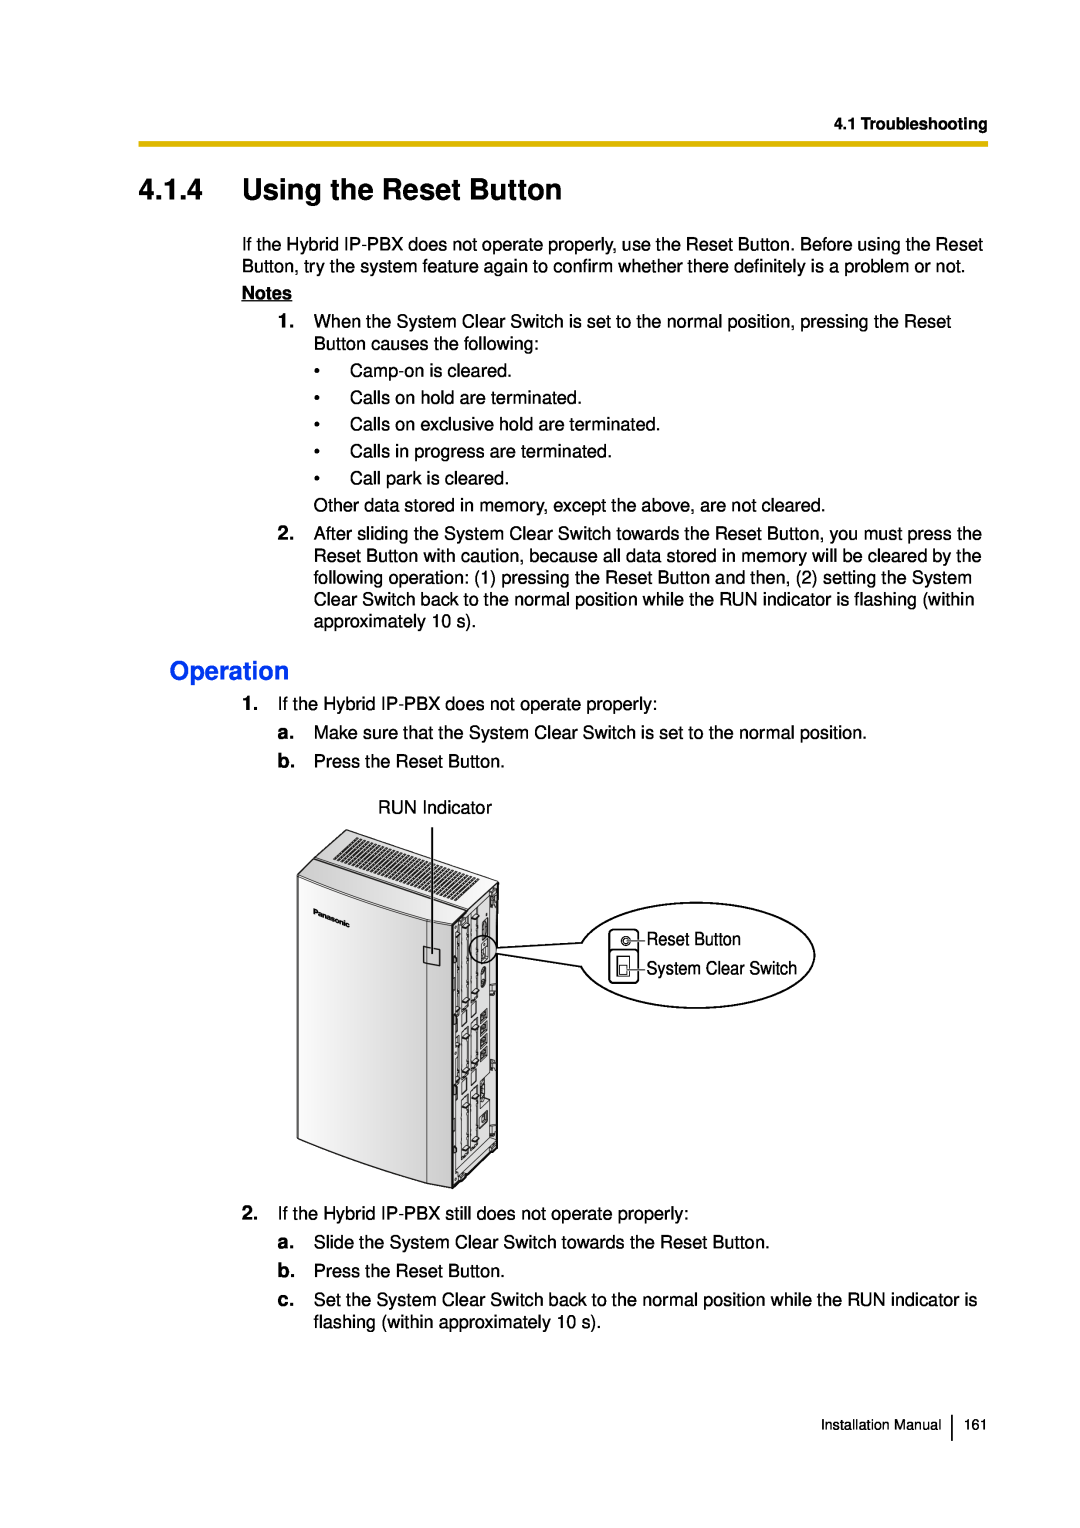 Panasonic KX-TDA30 installation manual 4.1.4Using the Reset Button, Operation, Notes 